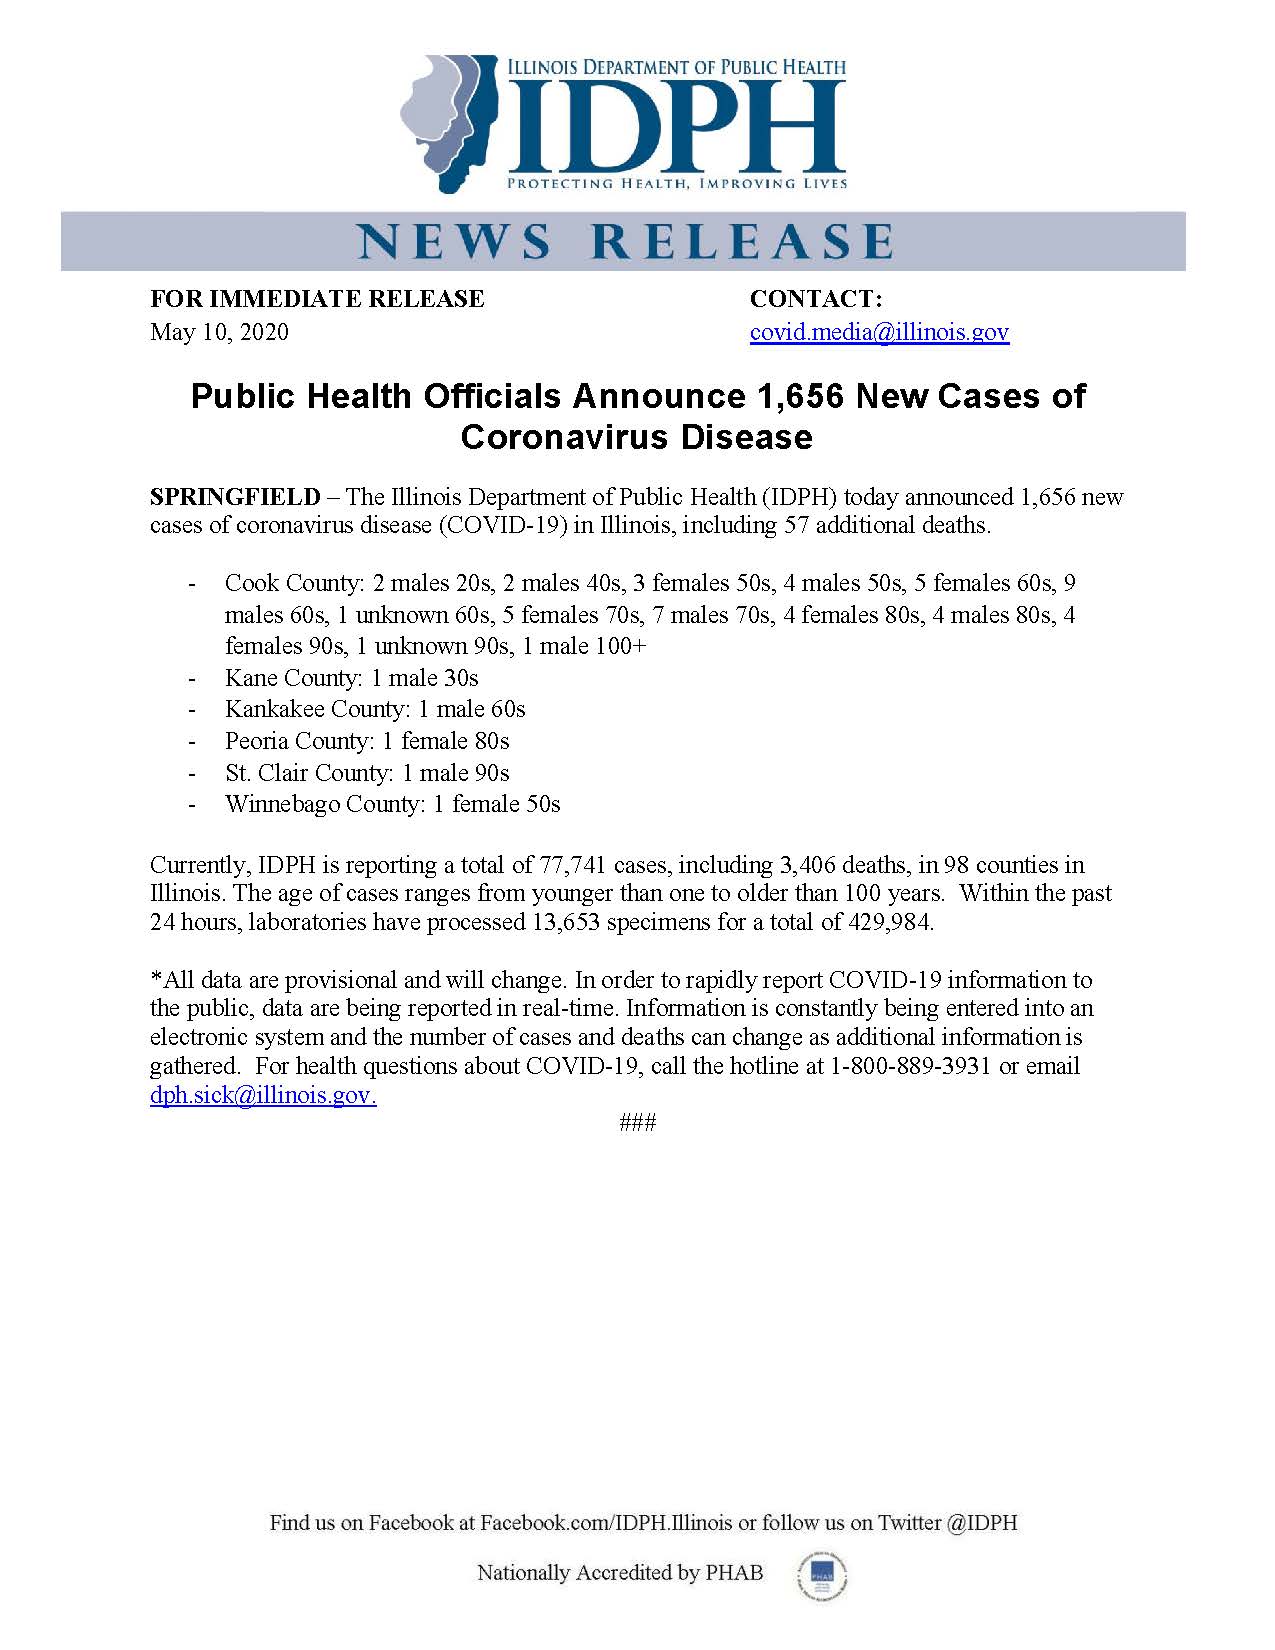 Public Health Officials Announce 1656 New Cases Of Coronavirus Disease Kendall County Health Department